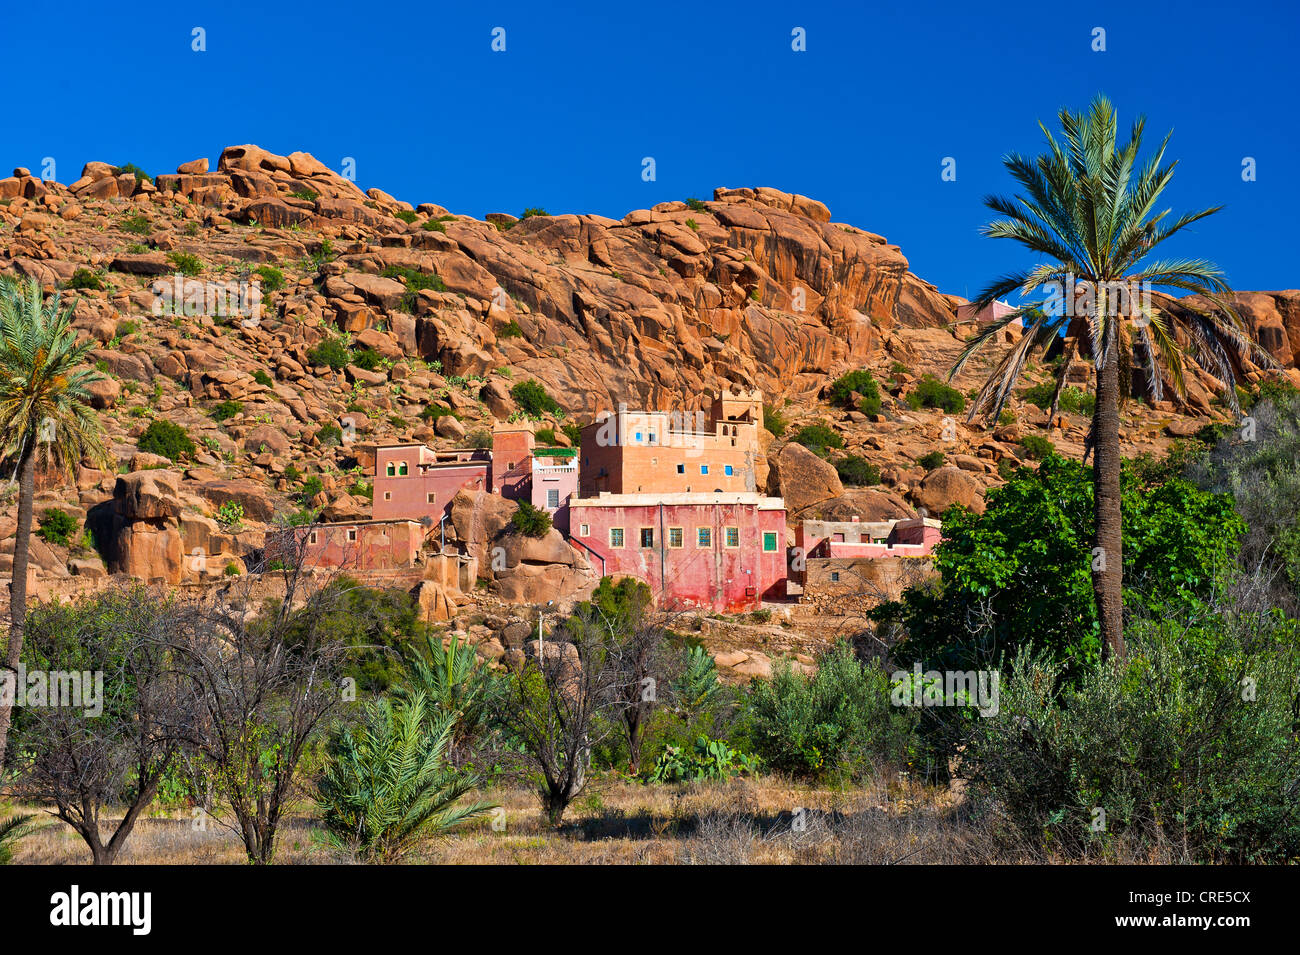 Typical mountain landscape with rocks, granite boulders and traditional Berber houses on the mountainside, Anti-Atlas Mountains Stock Photo